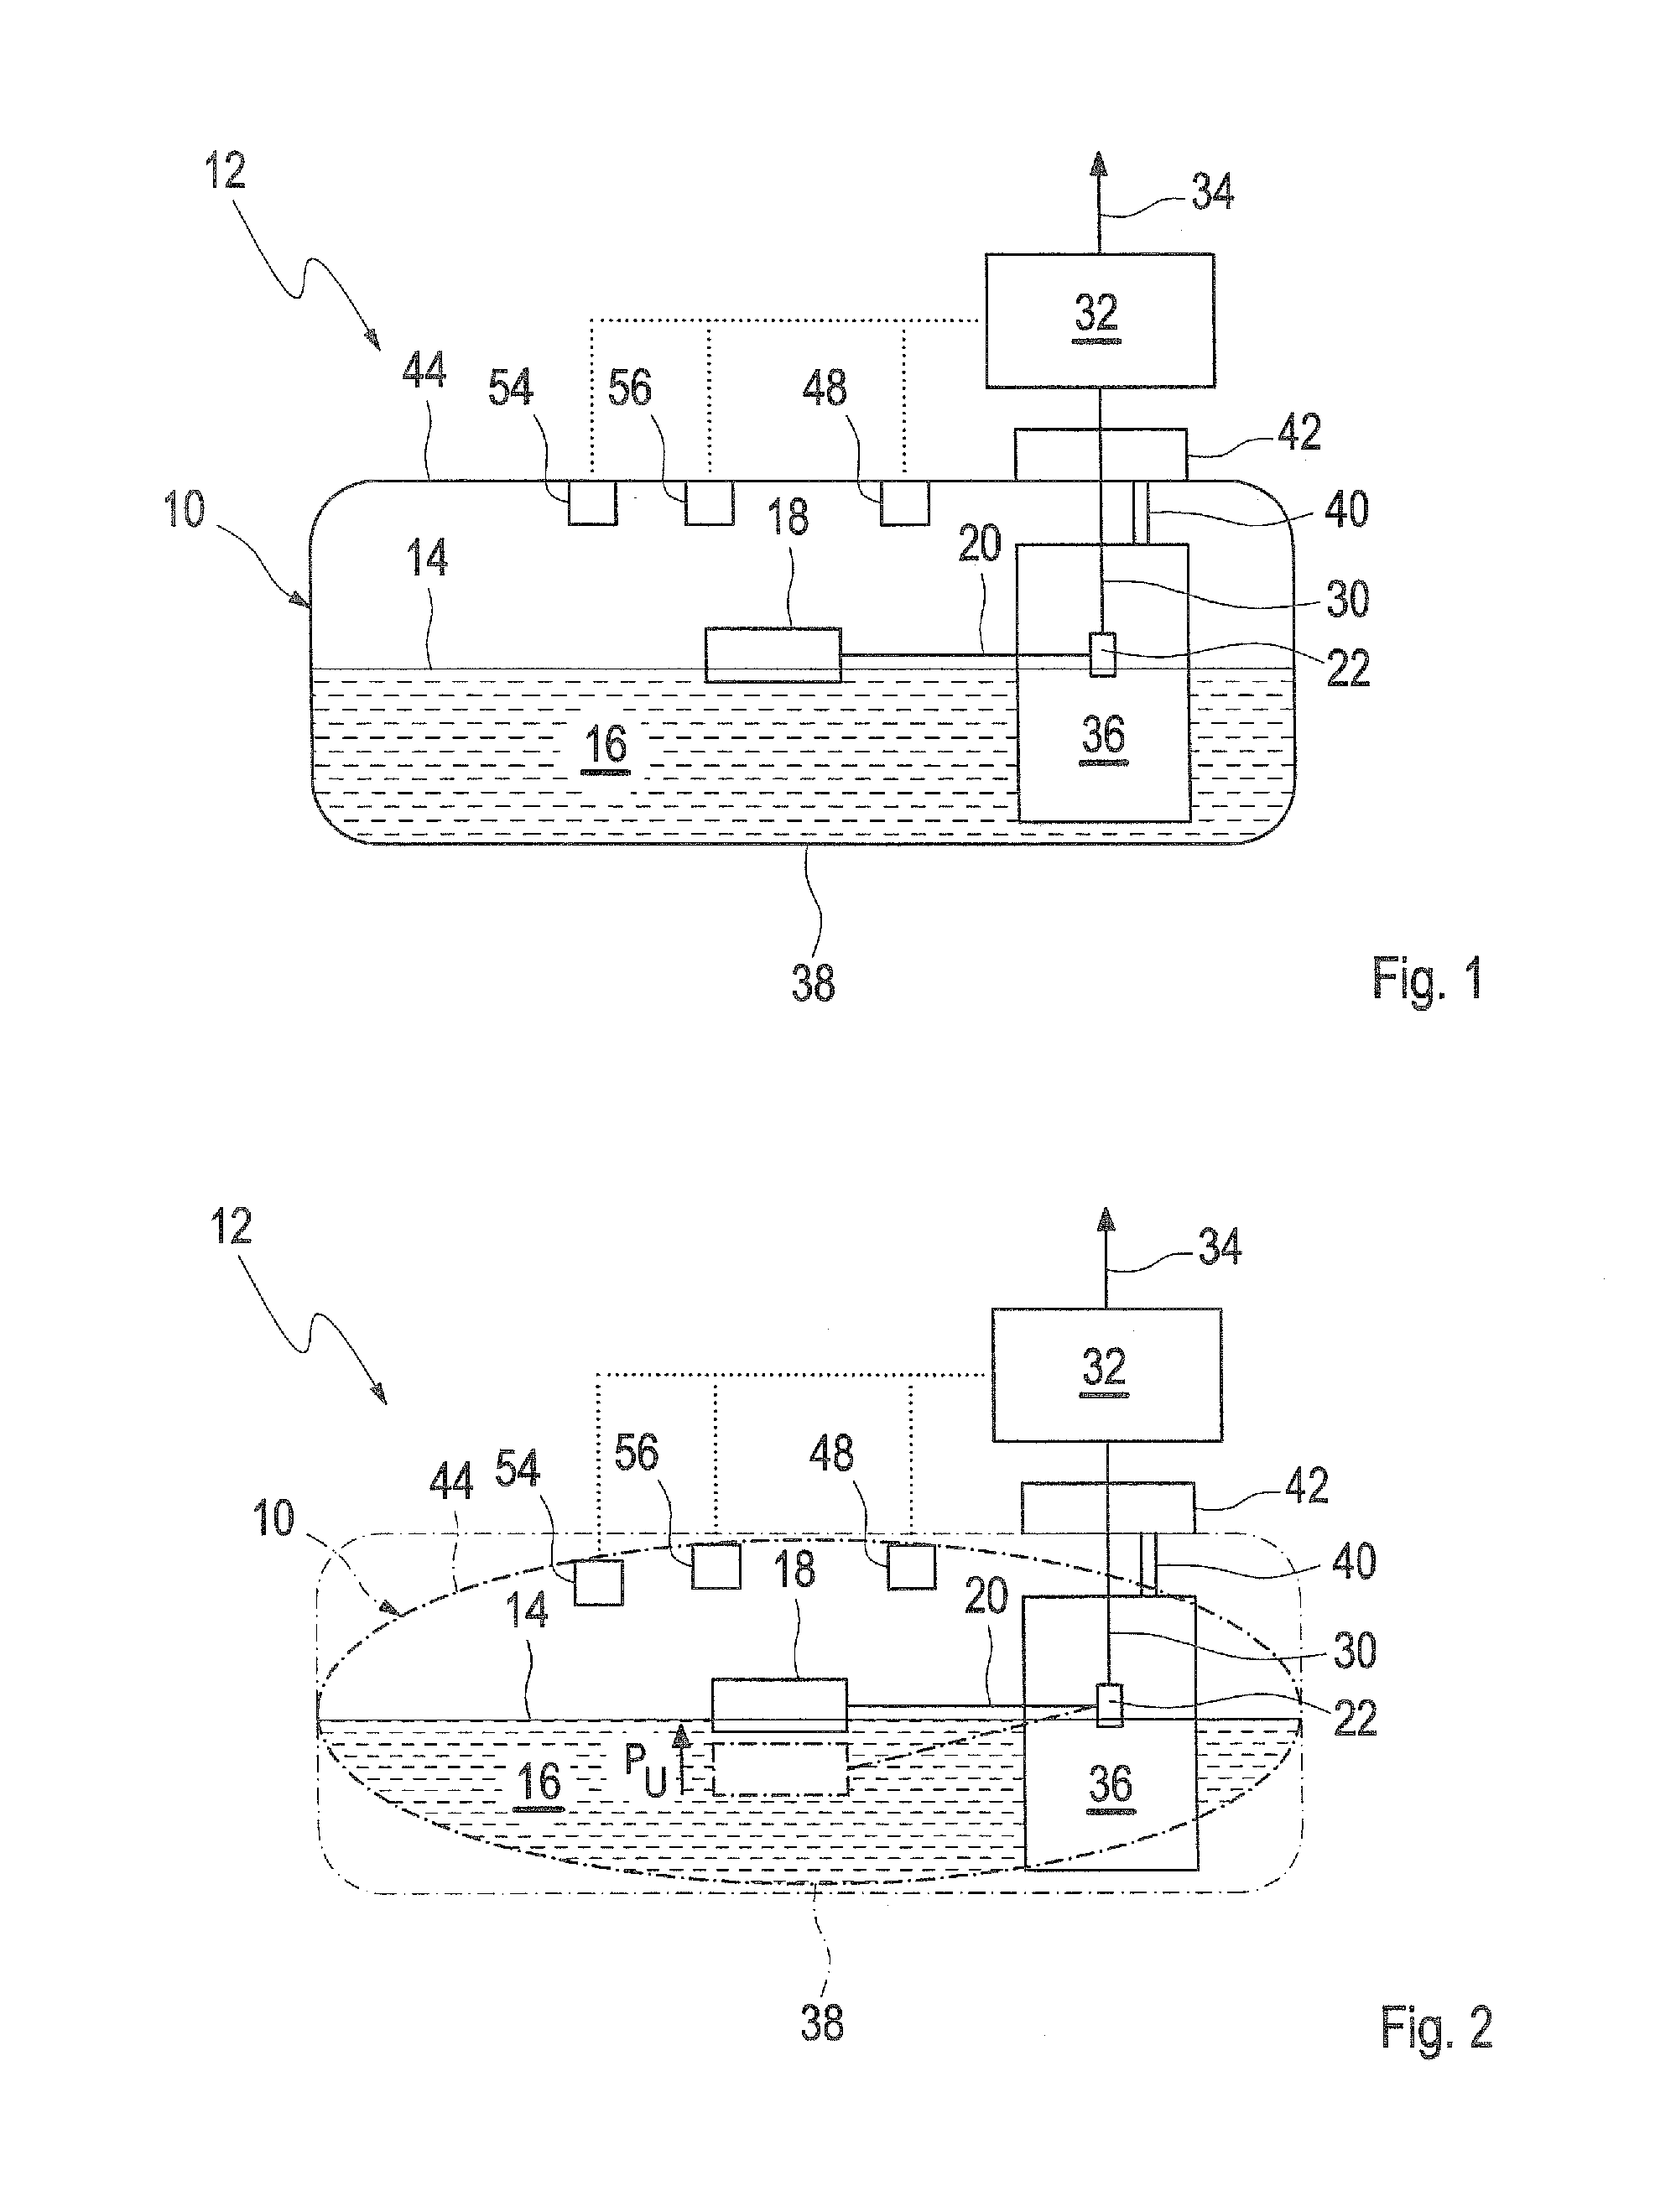 Measurement device and method for determining a fluid fill level in a fuel tank